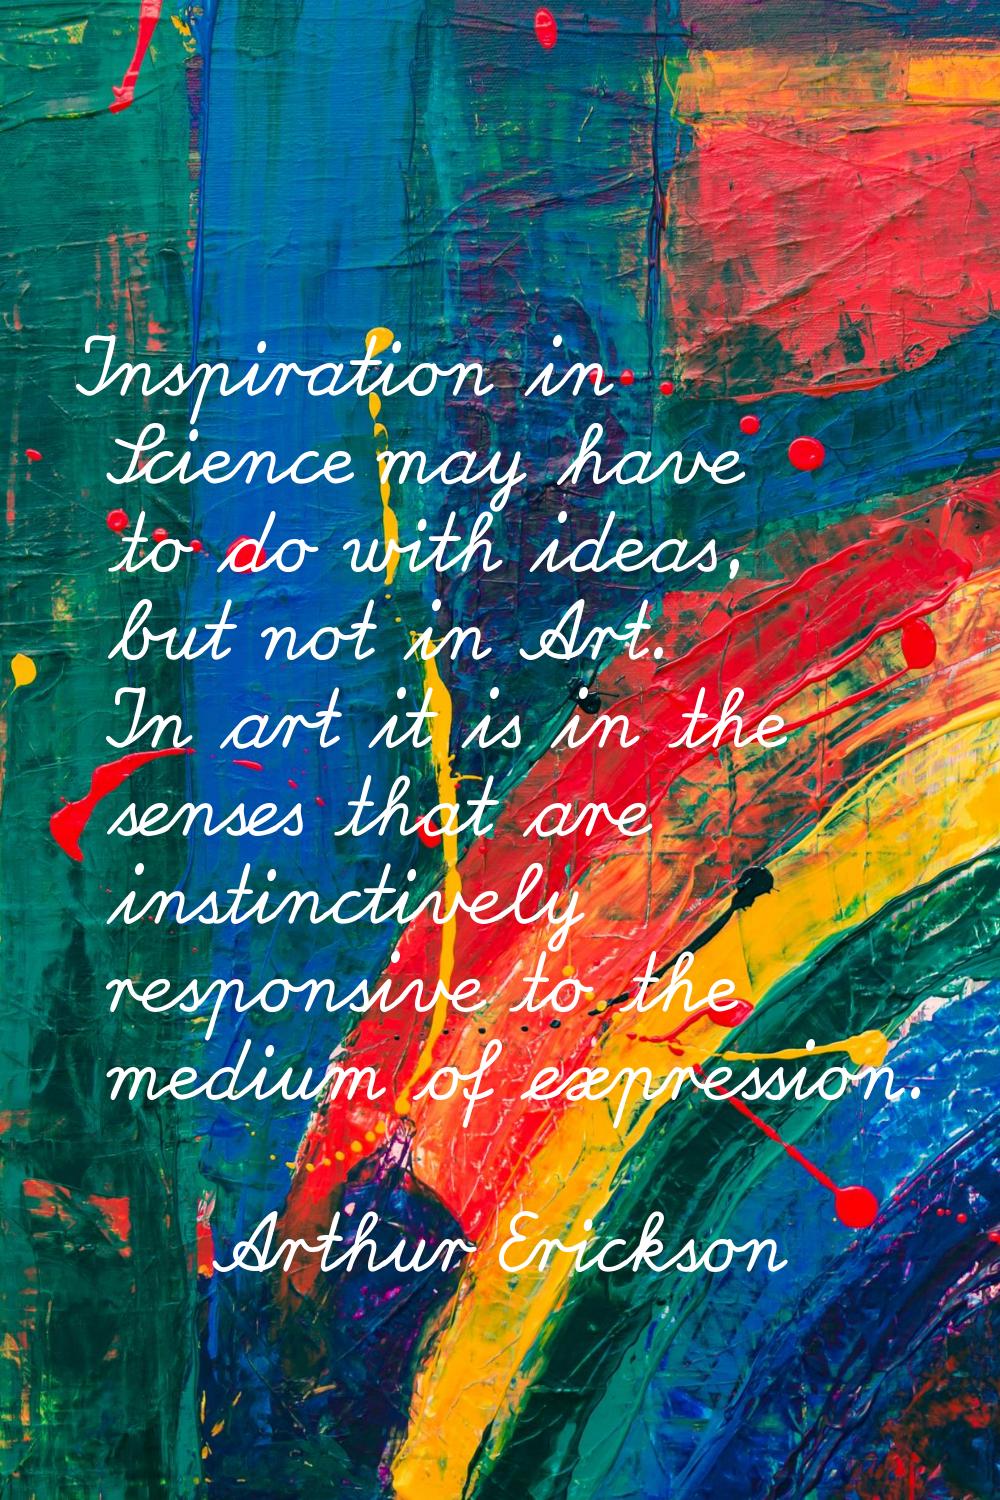 Inspiration in Science may have to do with ideas, but not in Art. In art it is in the senses that a